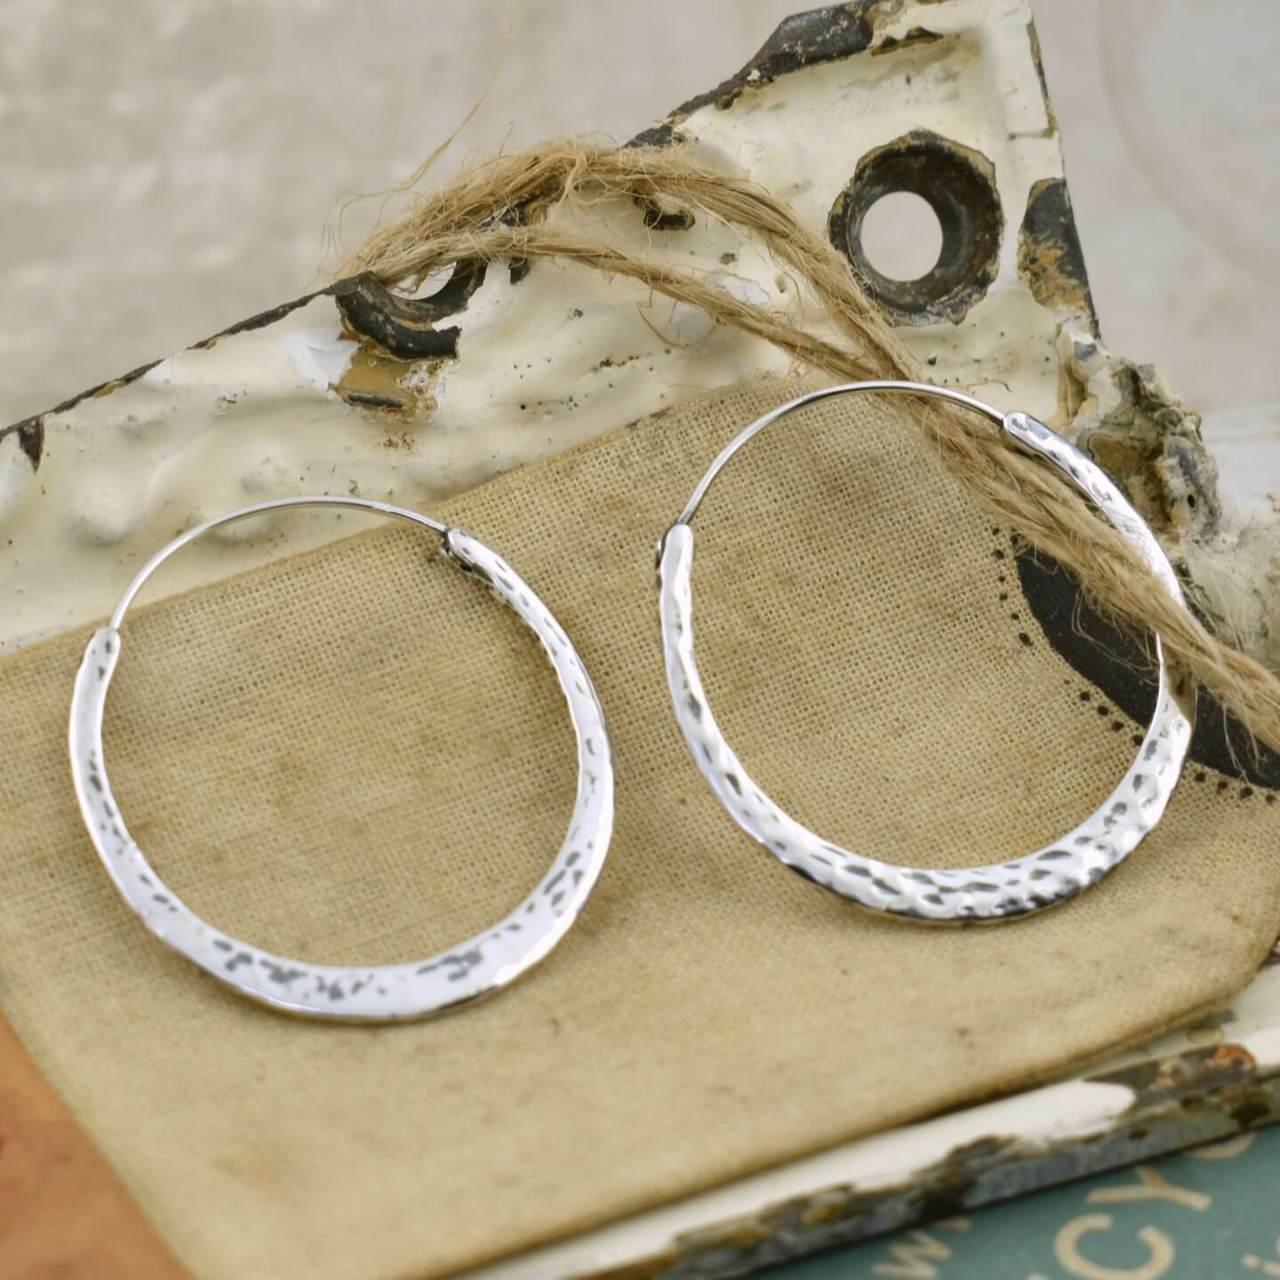 Handcrafted sterling silver earrings in a continuous wire style